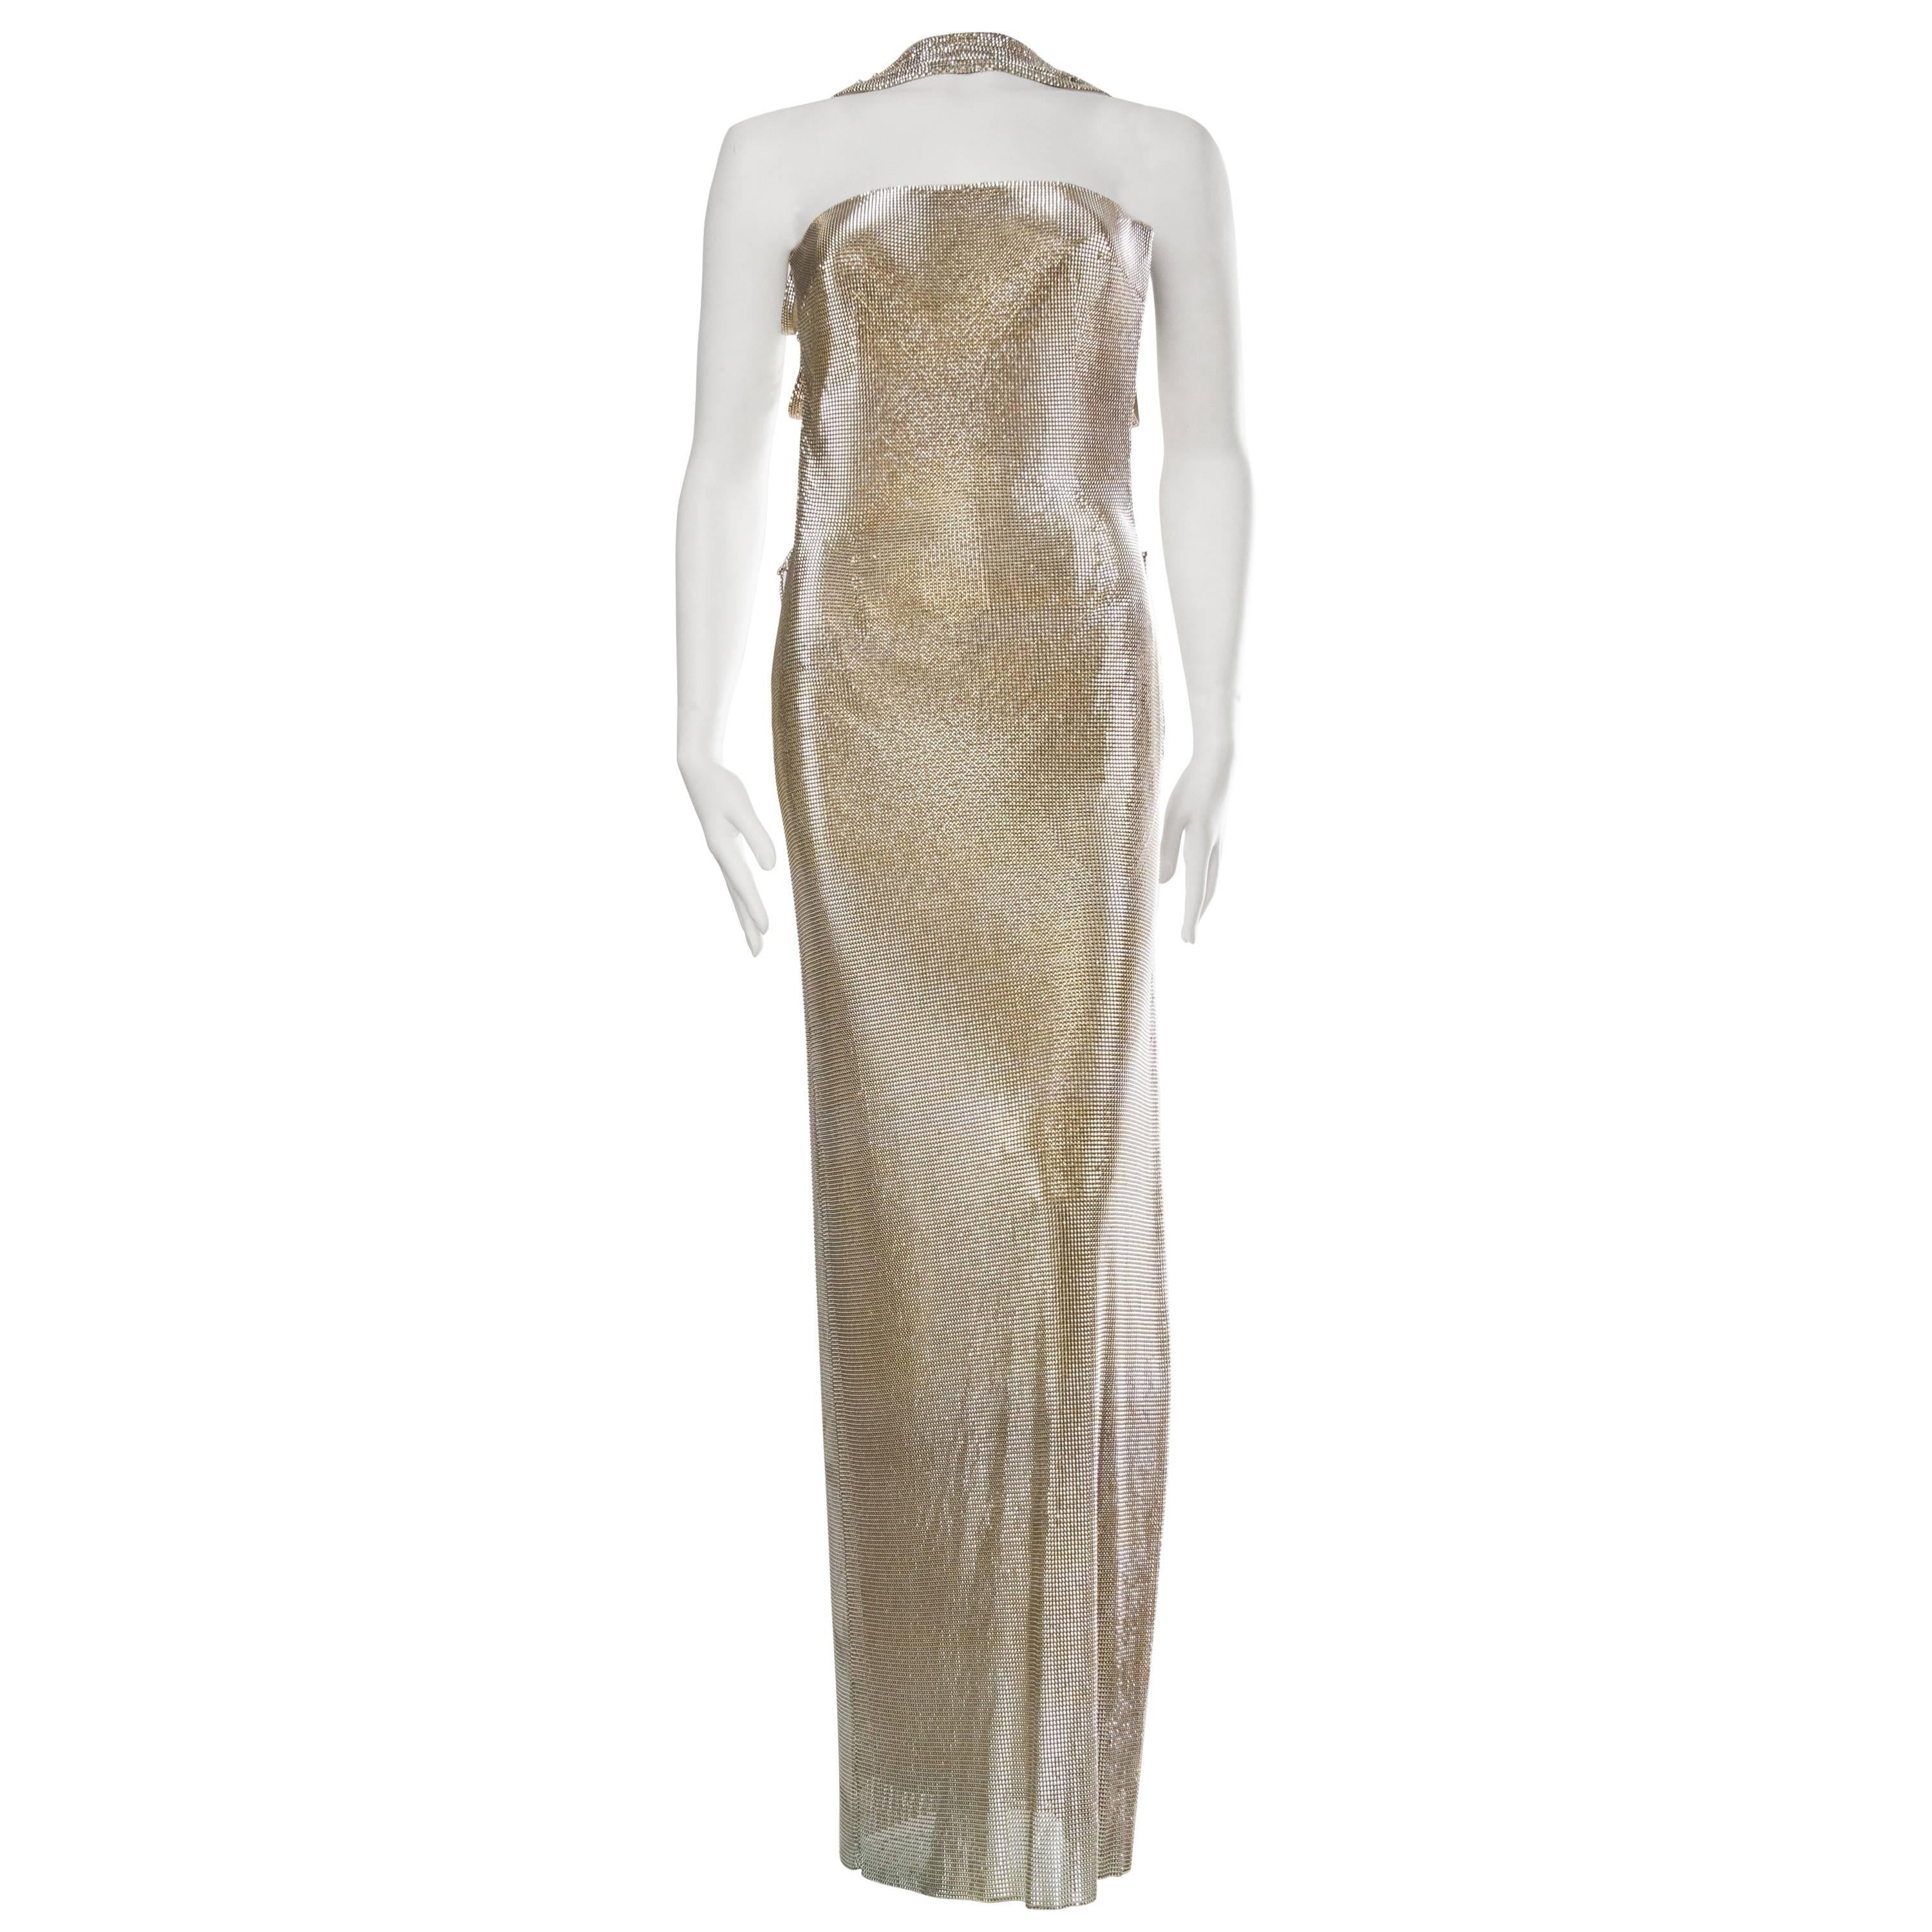 New with tags this shimmering gown has been ready to make her jaw-dropping entrance since the 1990s. The backless construction is a gorgeous design and the weight of the dress is supported by a fully boned and constructed bodice with one strap